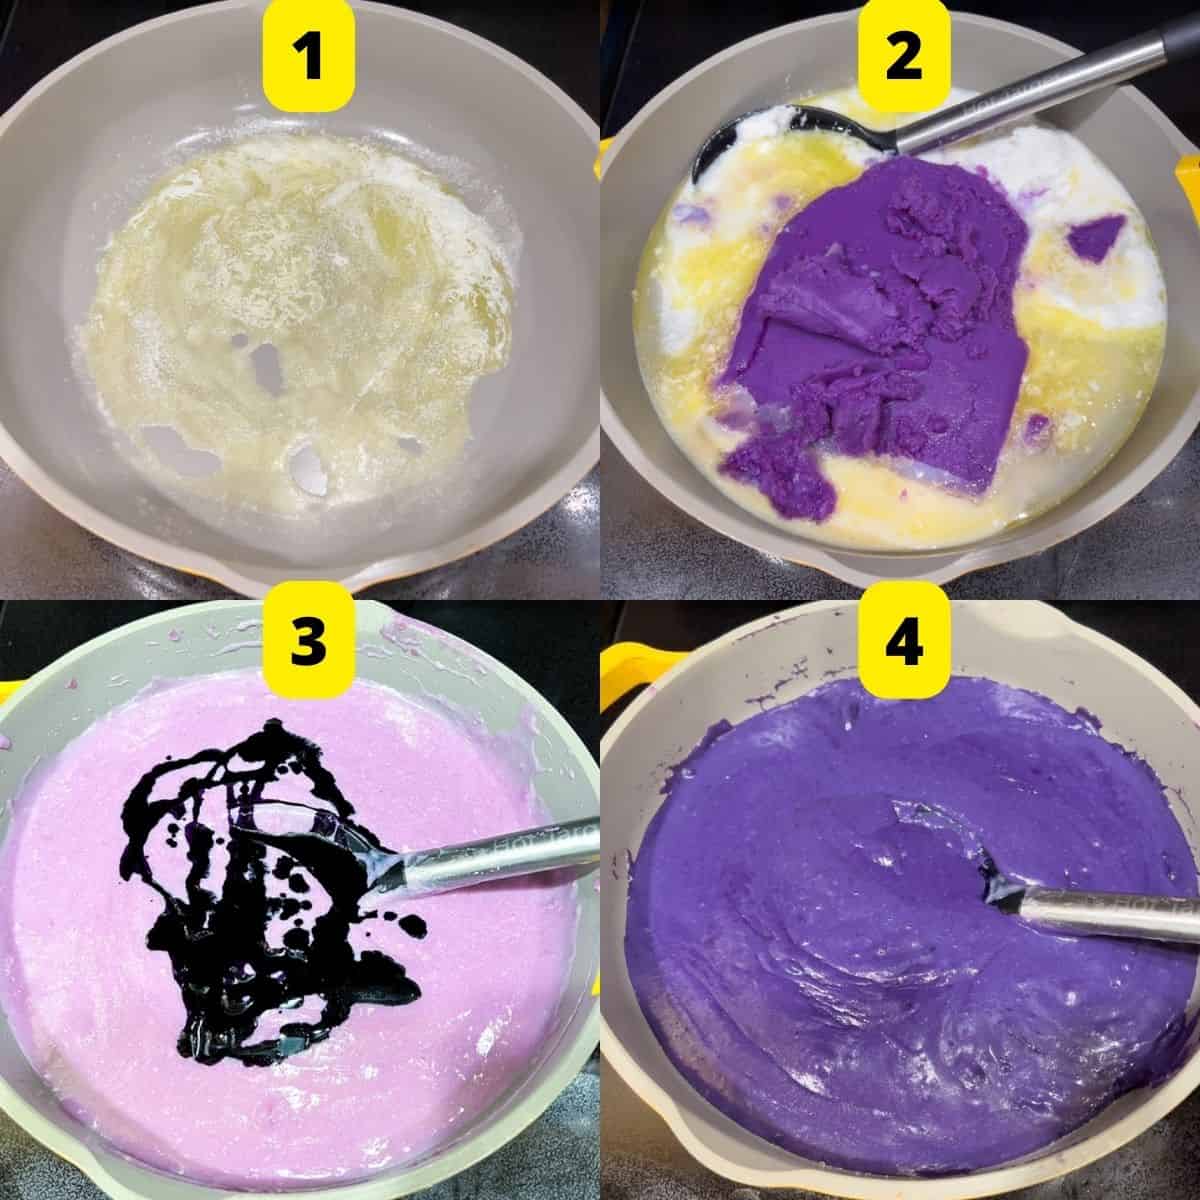 Step by step procedure on how to cook the best ube halaya jam.